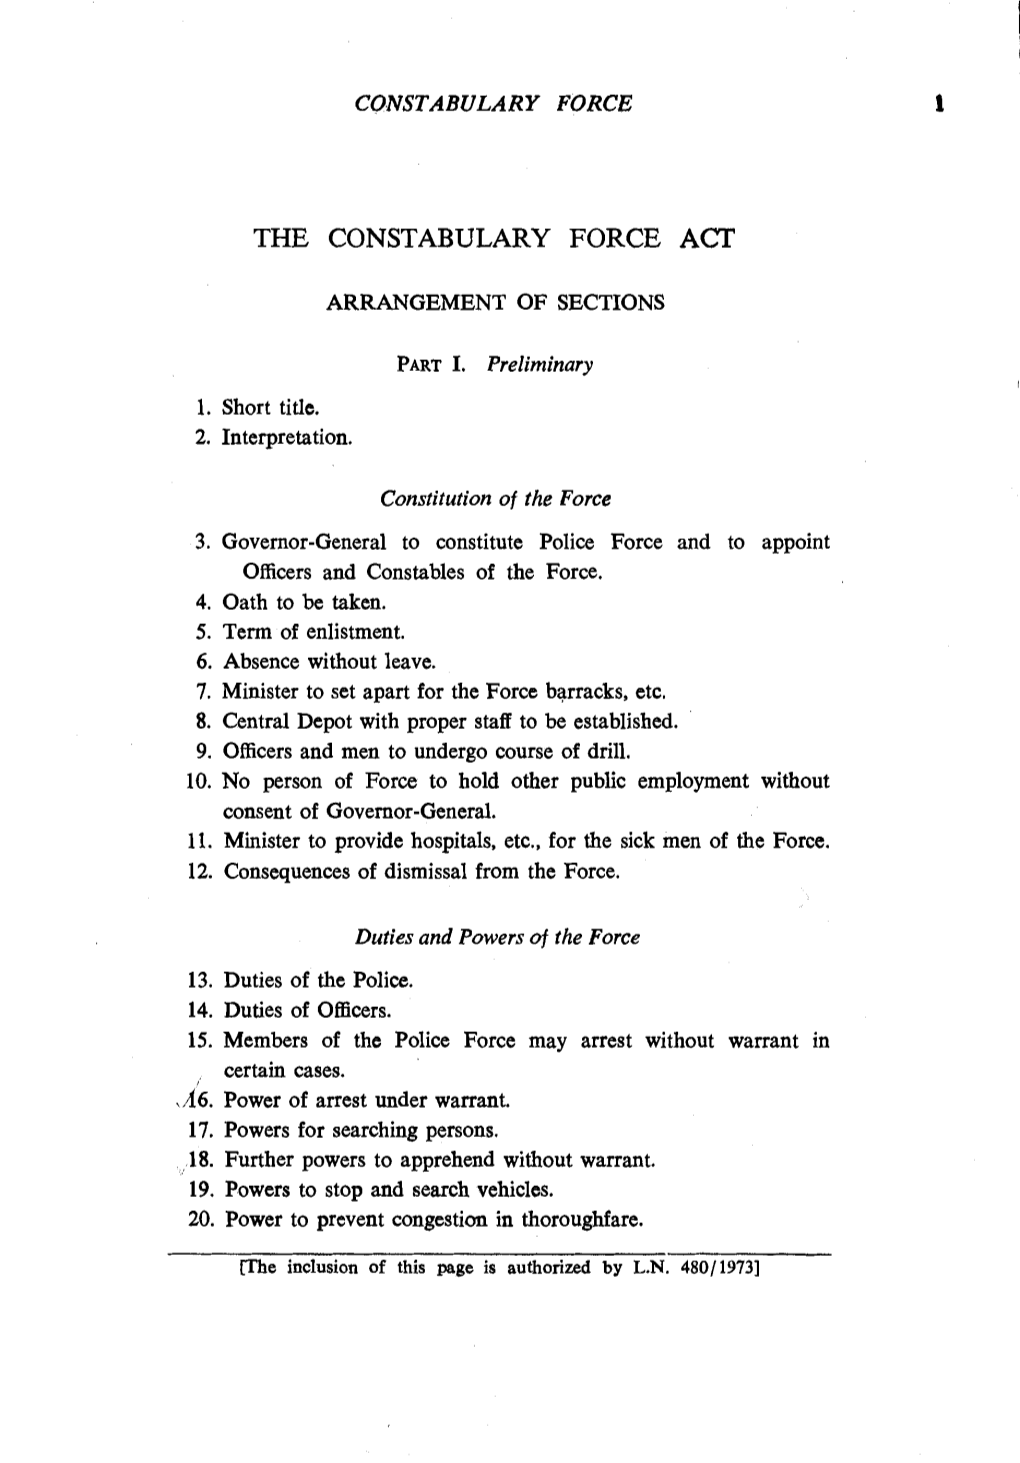 The Constabulary Force Act